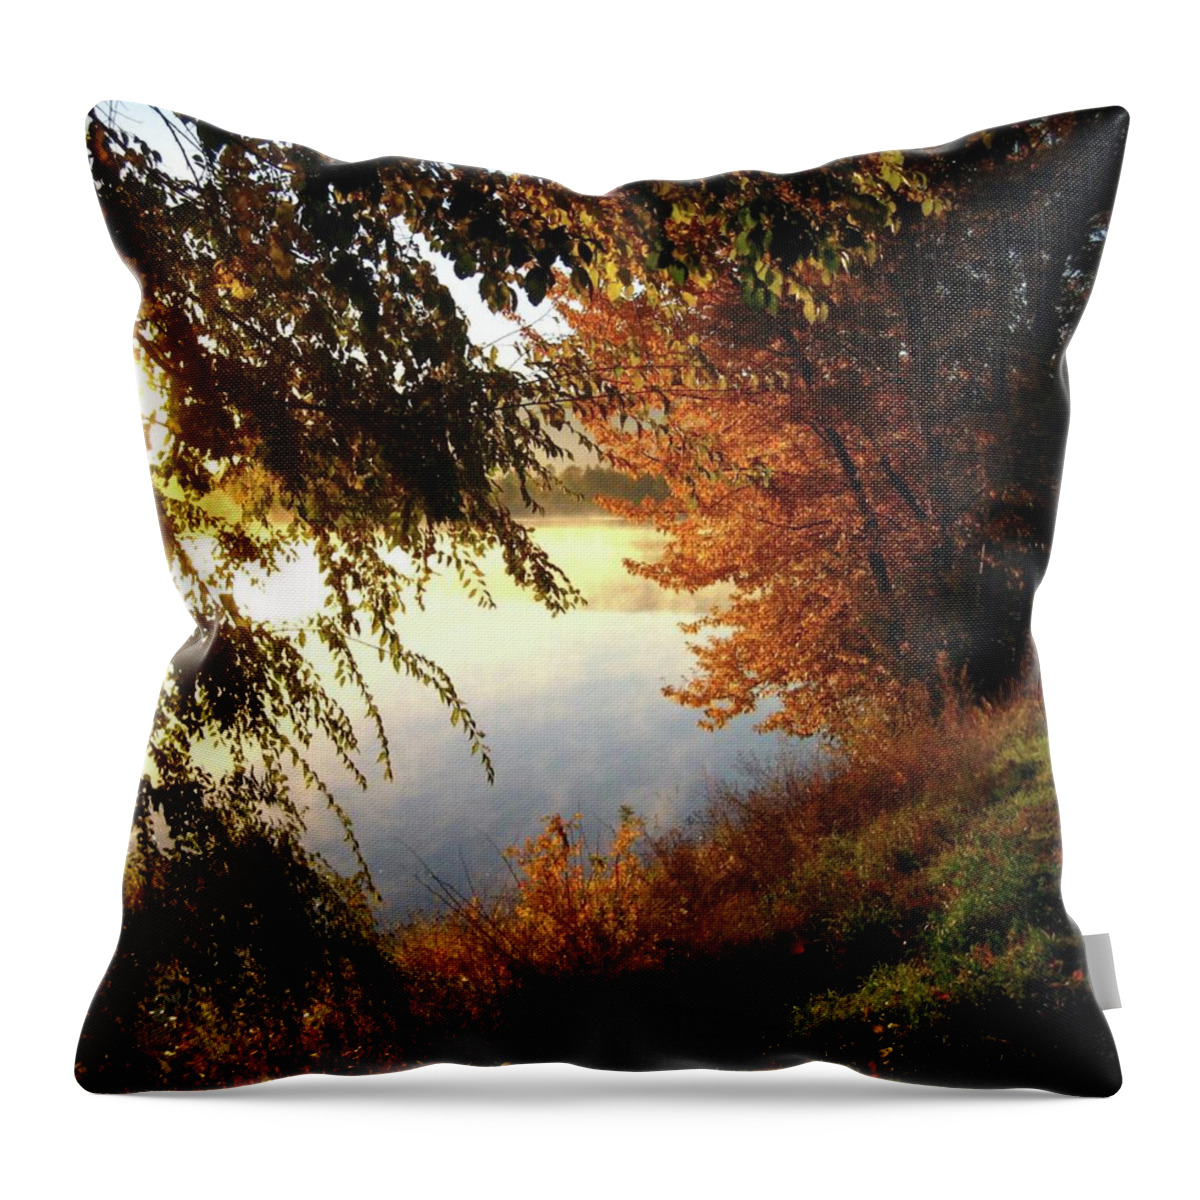 Landscape Throw Pillow featuring the photograph Autumn Morning by Kathy Bassett